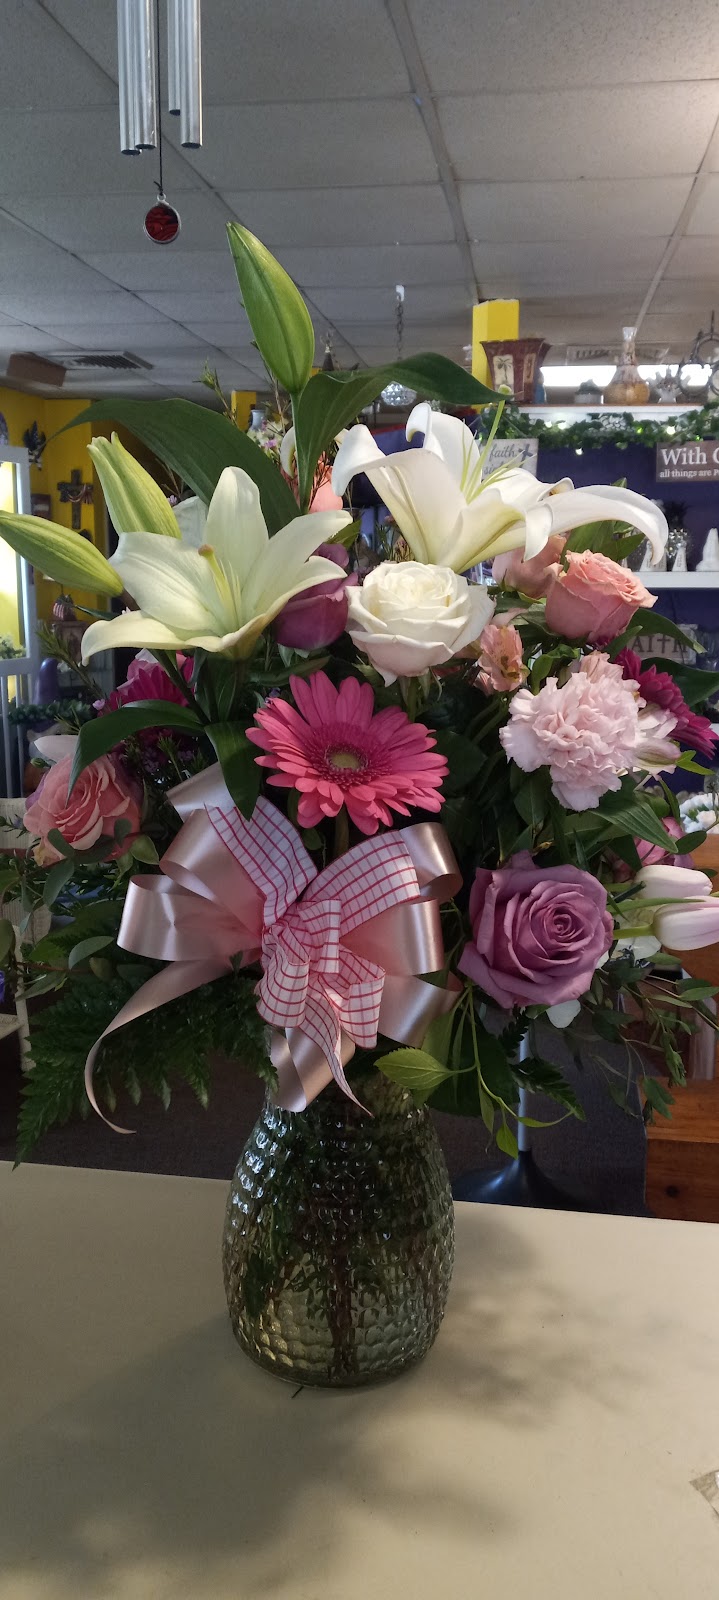 Whiting Flower Shoppe | 550 route 530 Crestwood Shopping Center, 550 County Rd 530, Manchester Township, NJ 08759 | Phone: (732) 941-4513